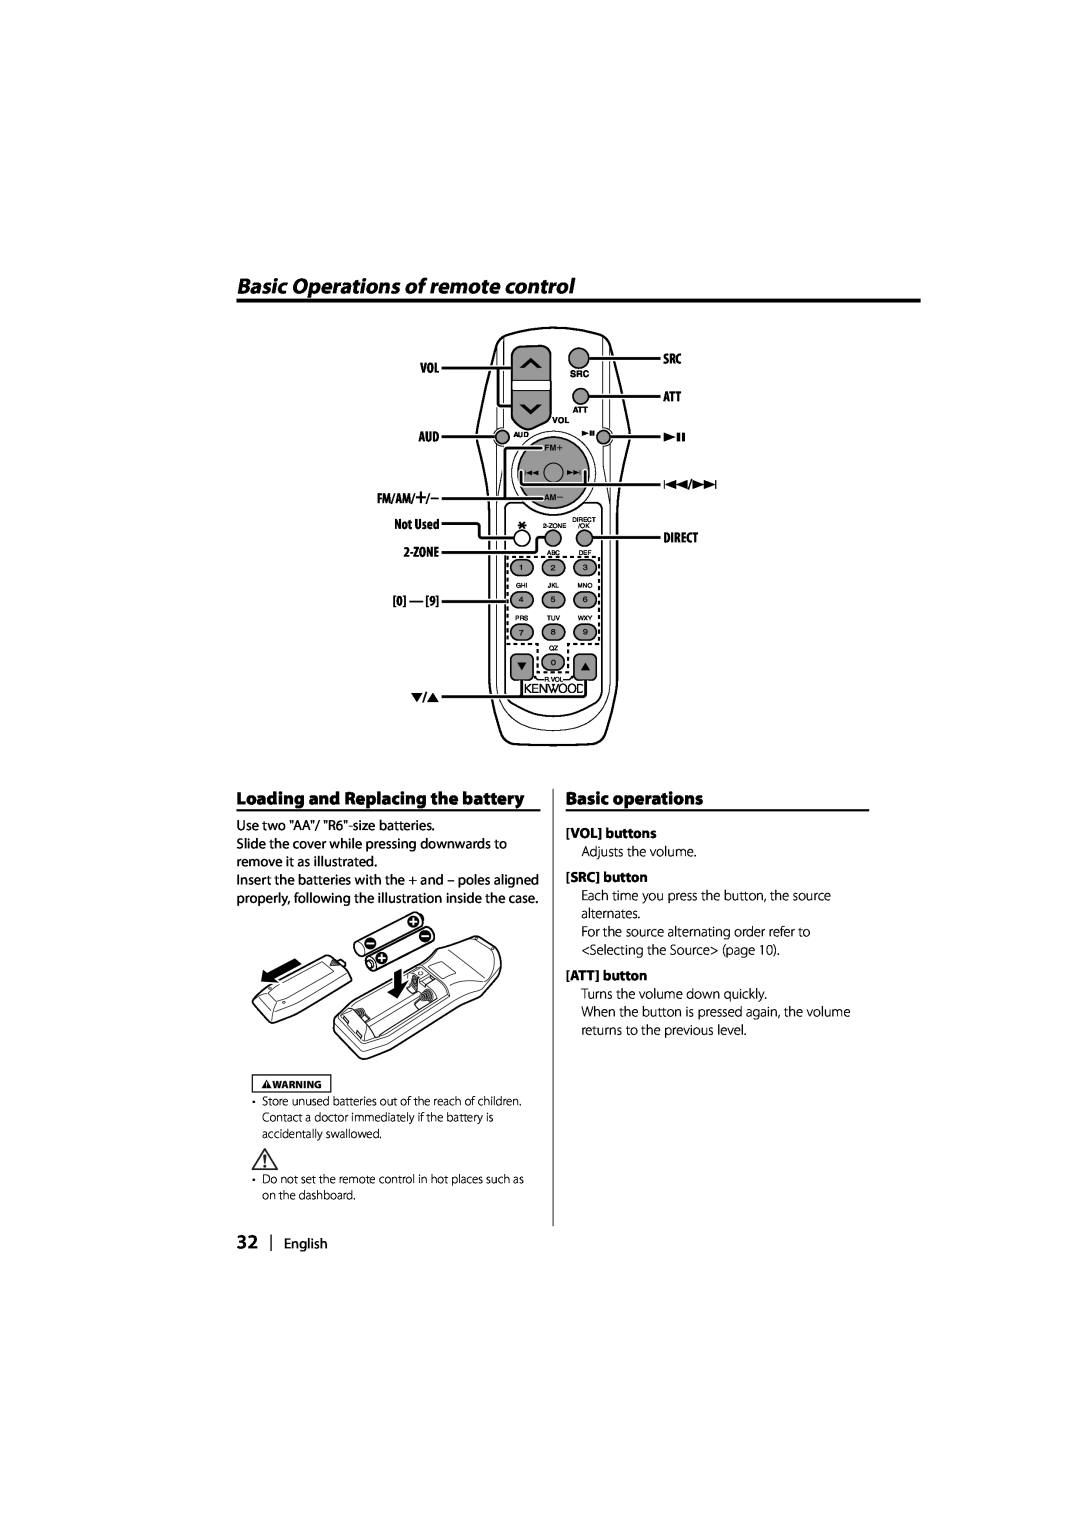 Kenwood DPX-MP2090U Basic Operations of remote control, Loading and Replacing the battery, Basic operations 